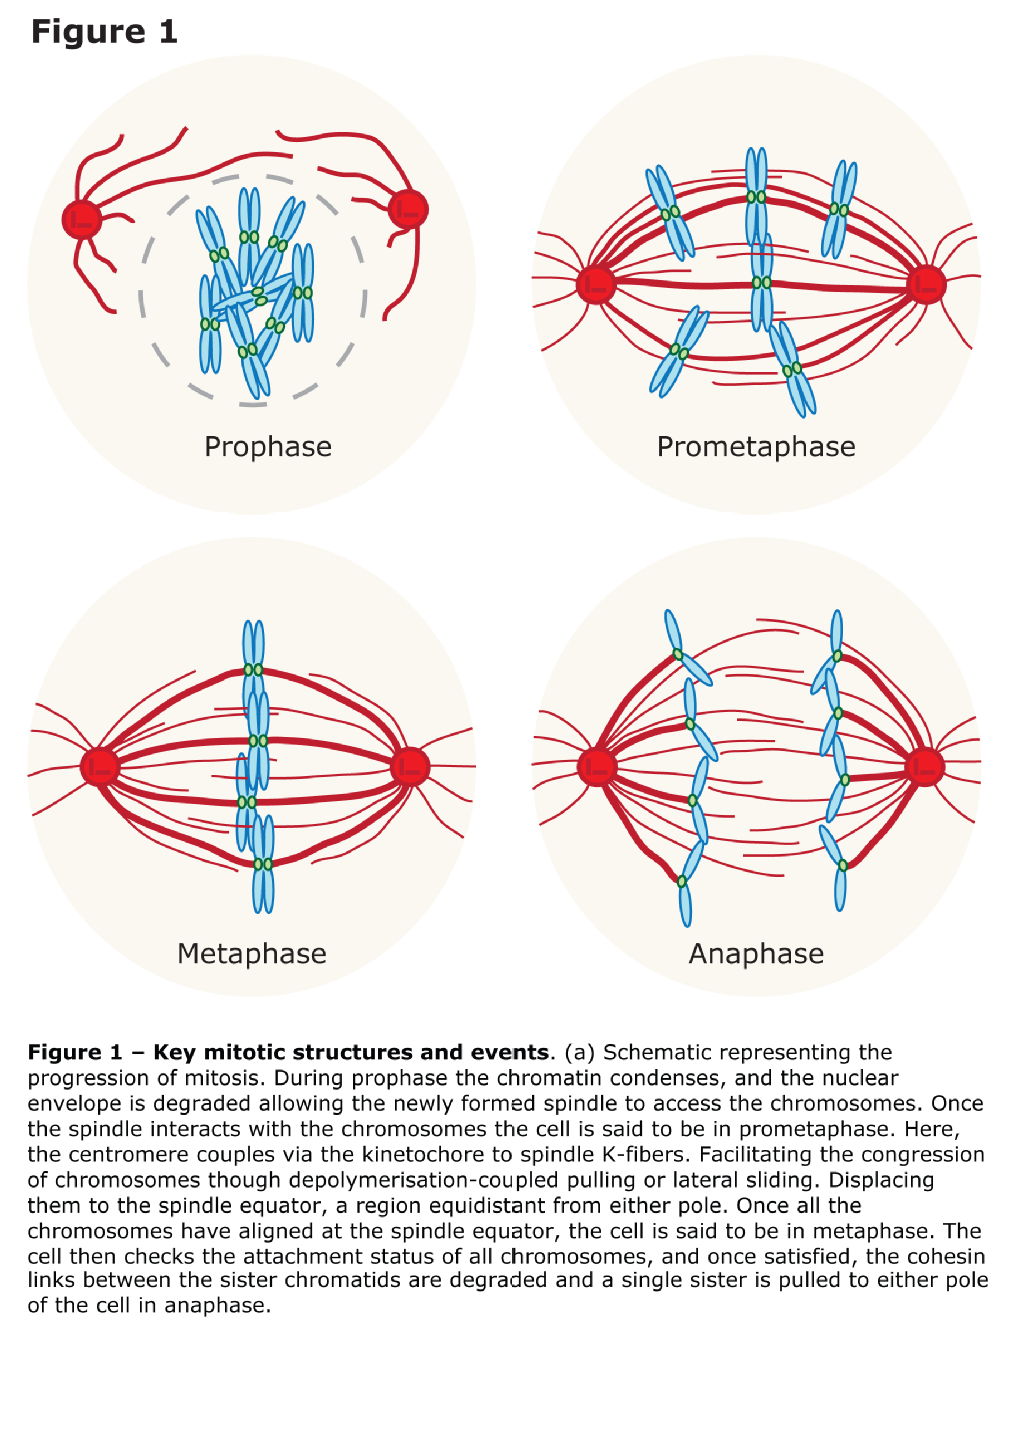 Overview of mitosis